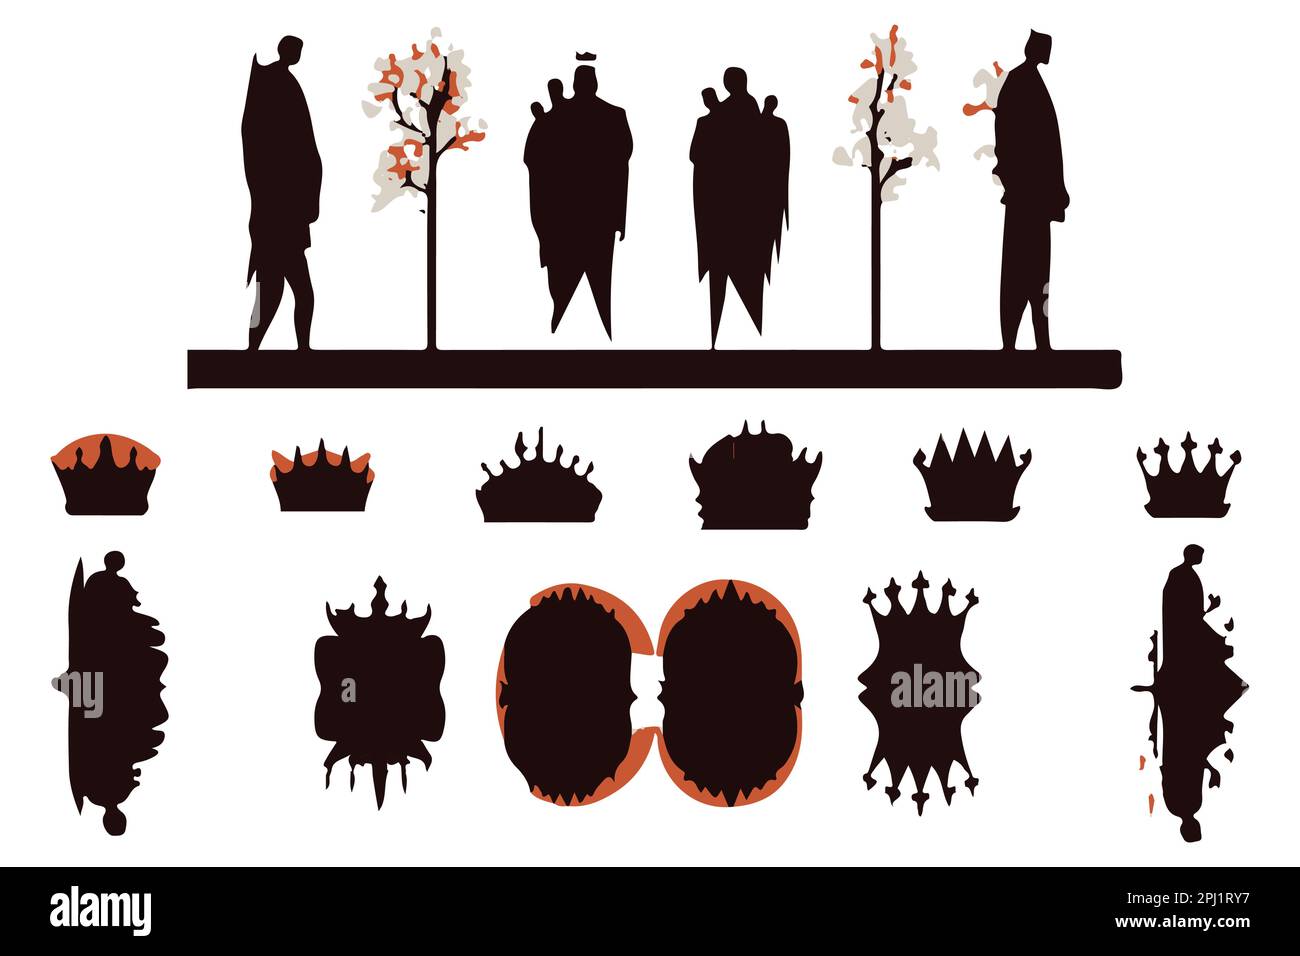 Silhouettes king crowns set Illustration vector design collection Stock Vector